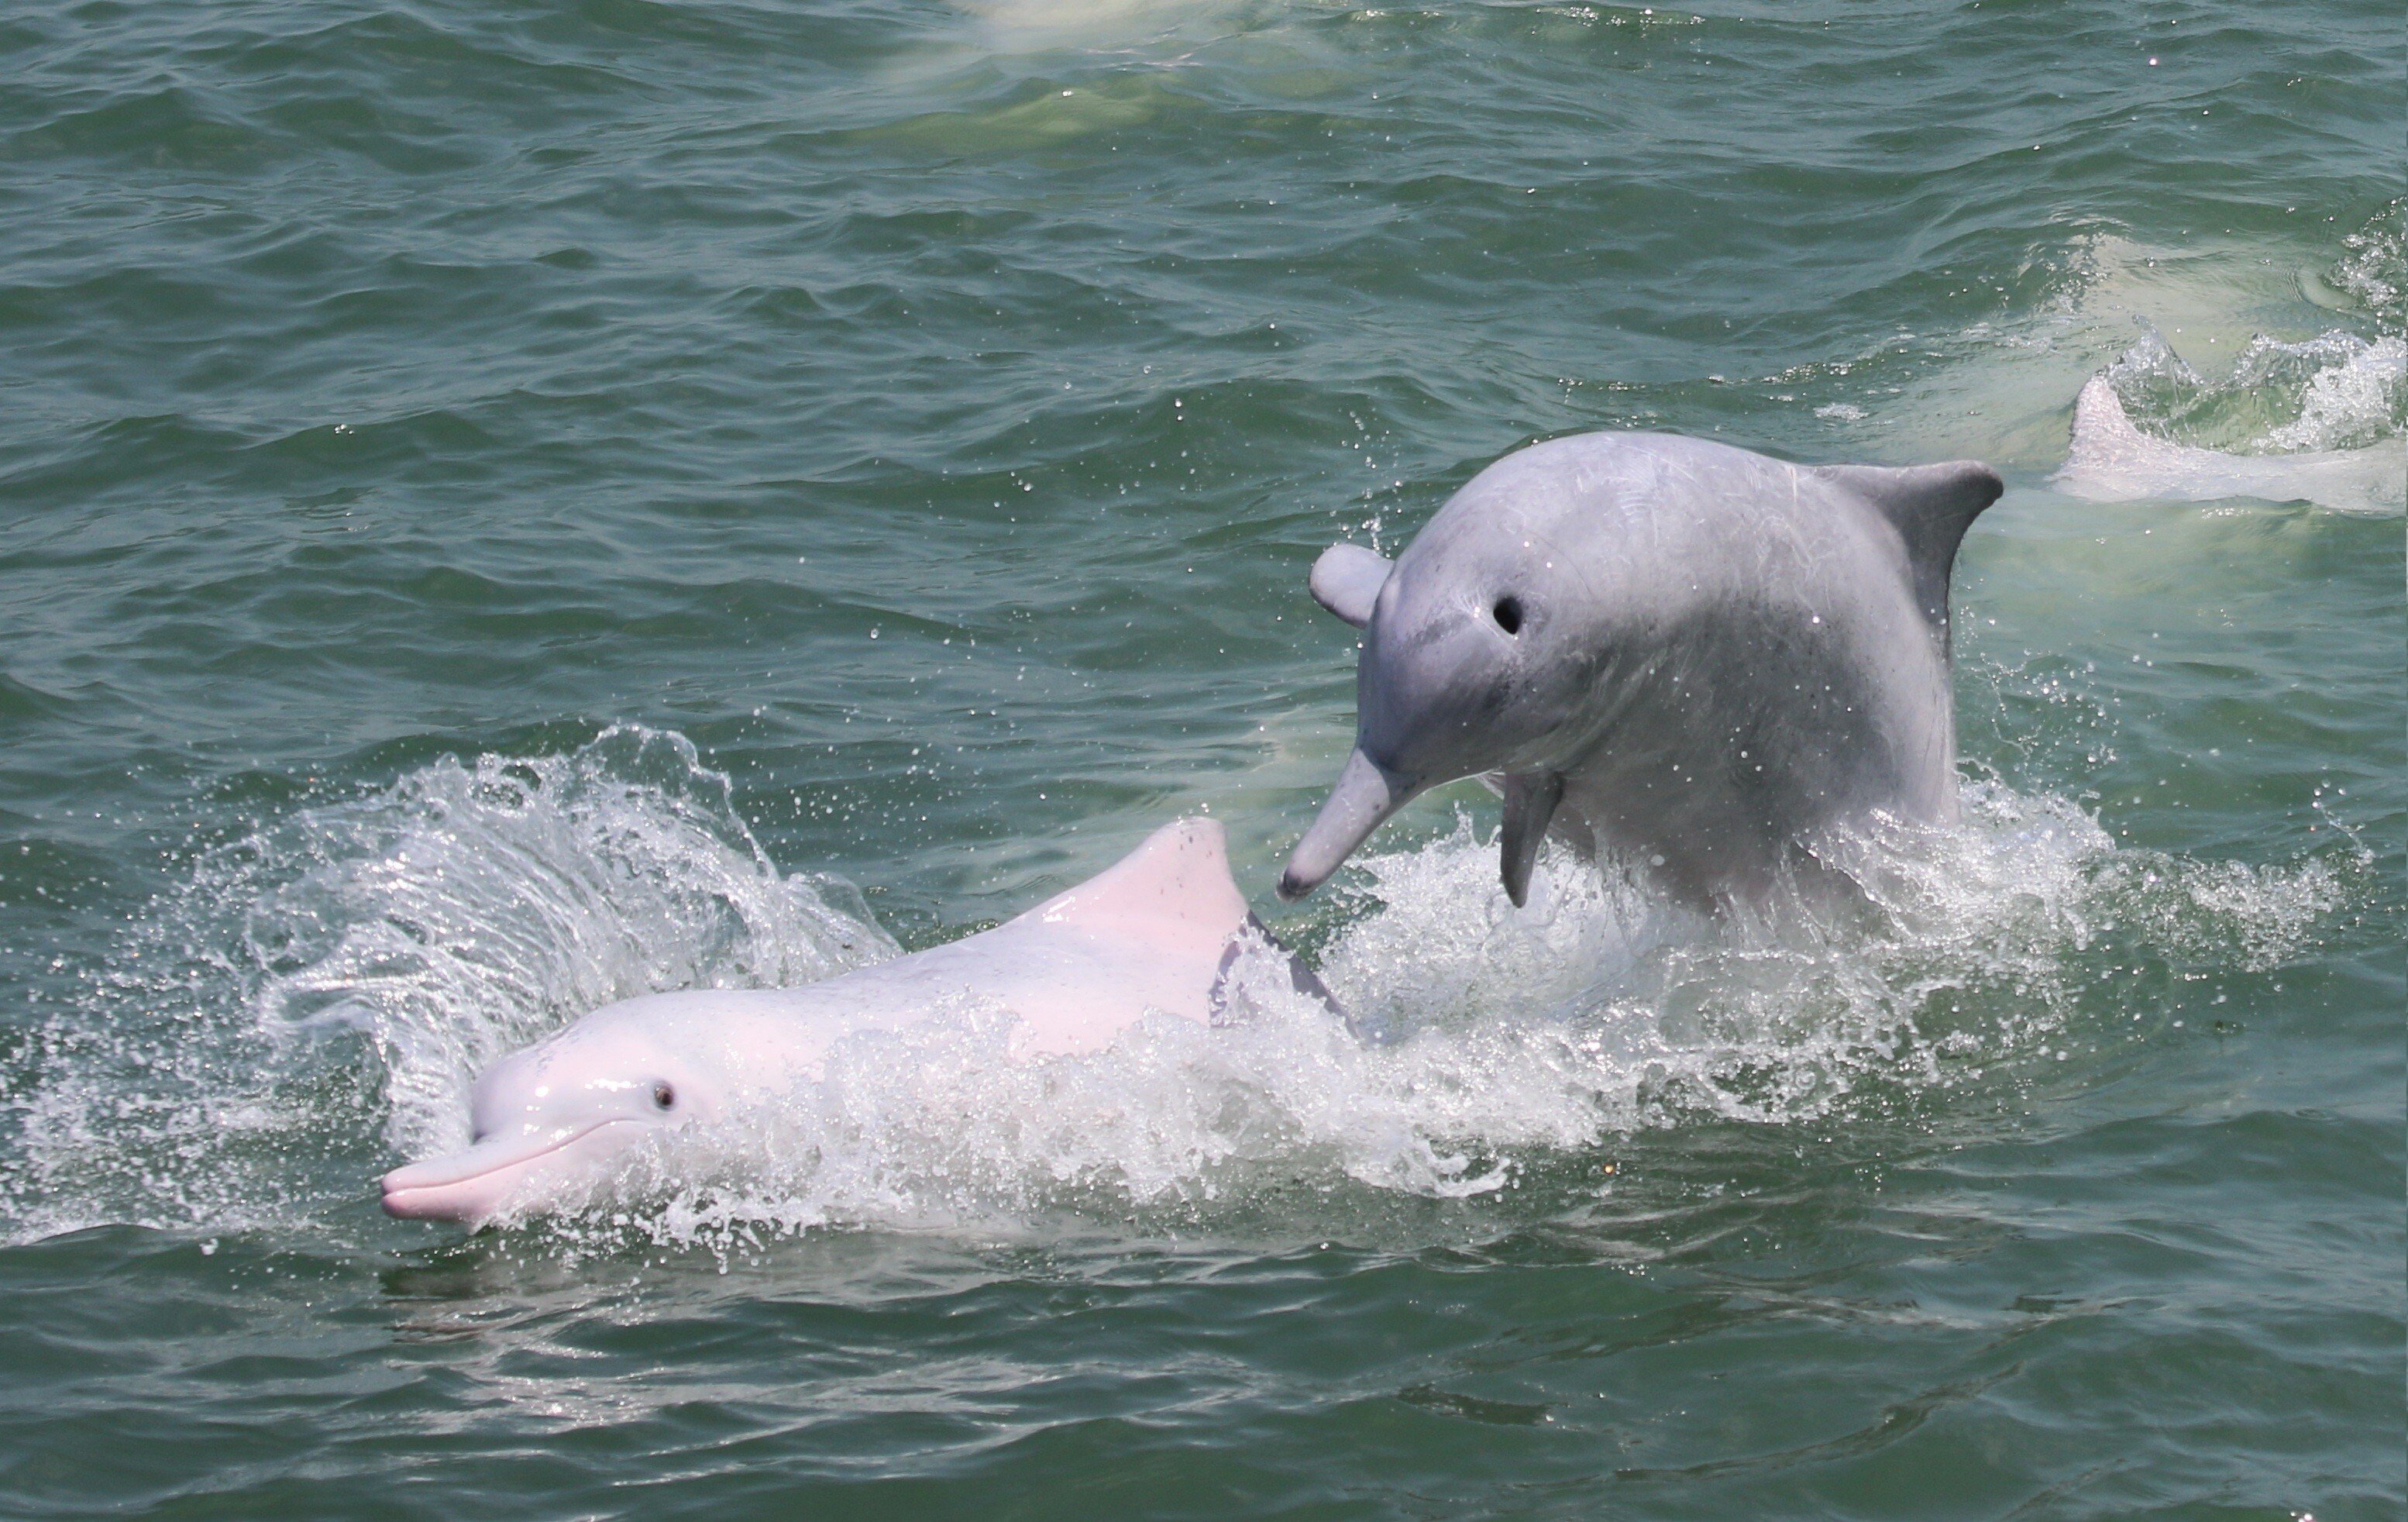 Chinese white dolphins play in Hong Kong waters in 2016. Photo: Hong Kong Dolphin Conservation Society